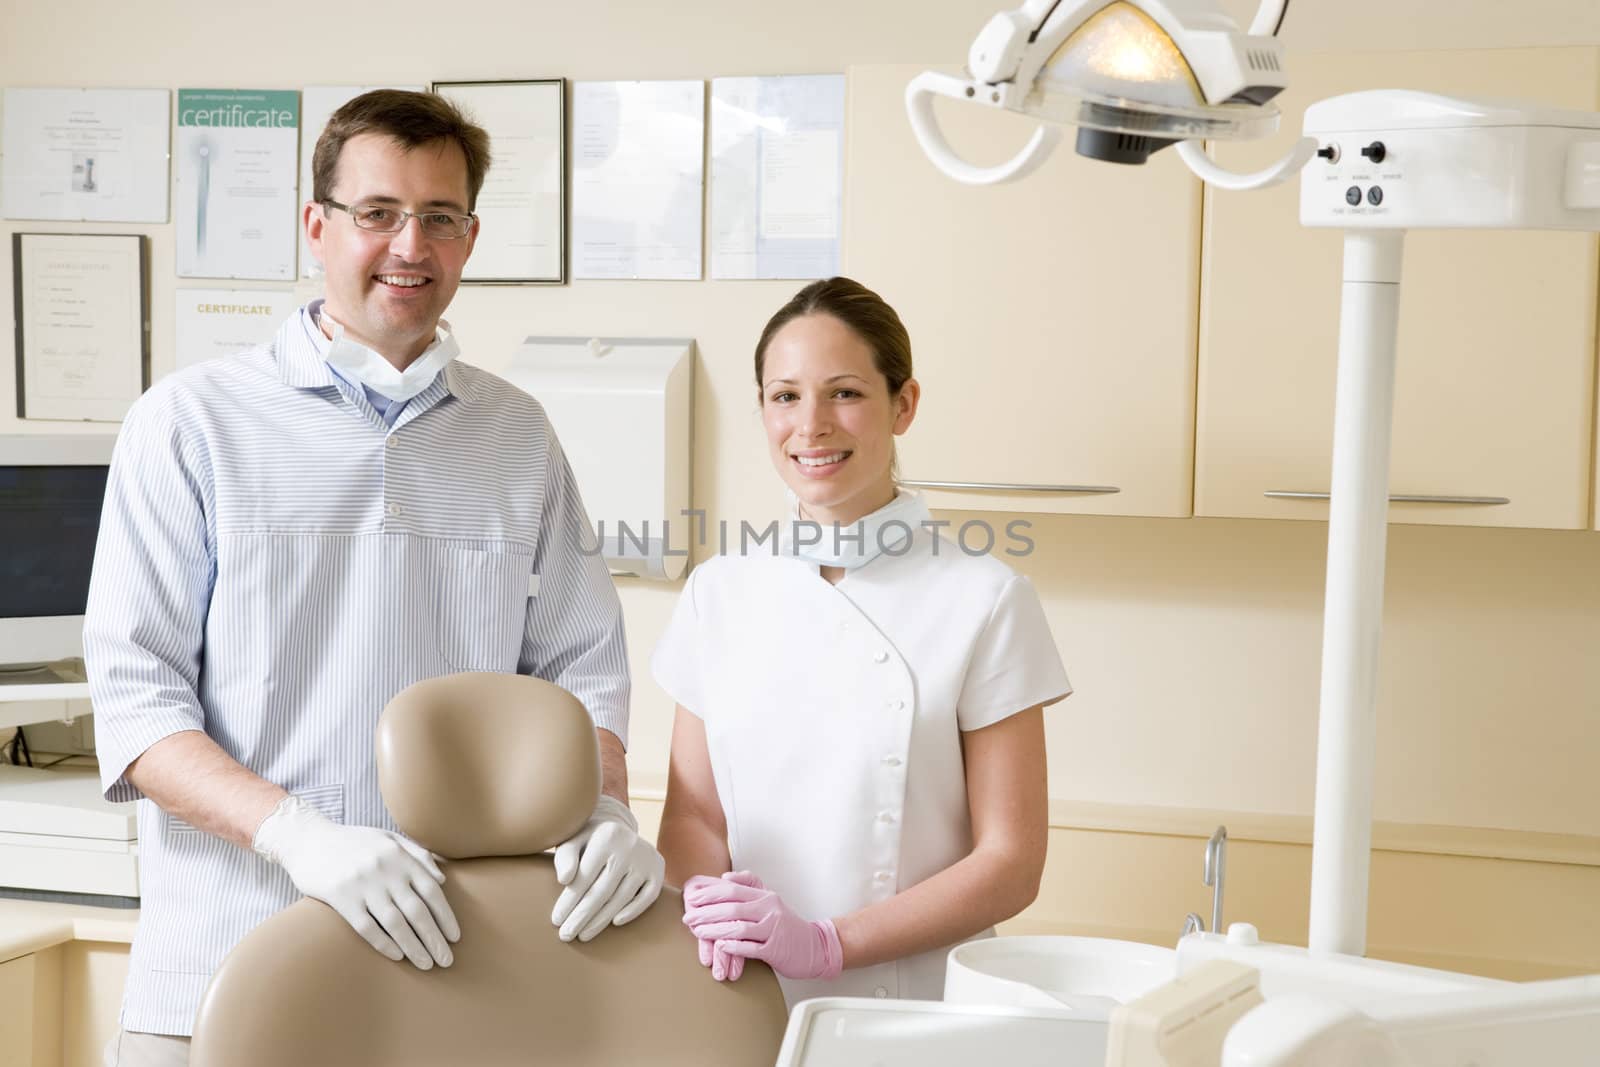 Dentist and assistant in exam room smiling by MonkeyBusiness